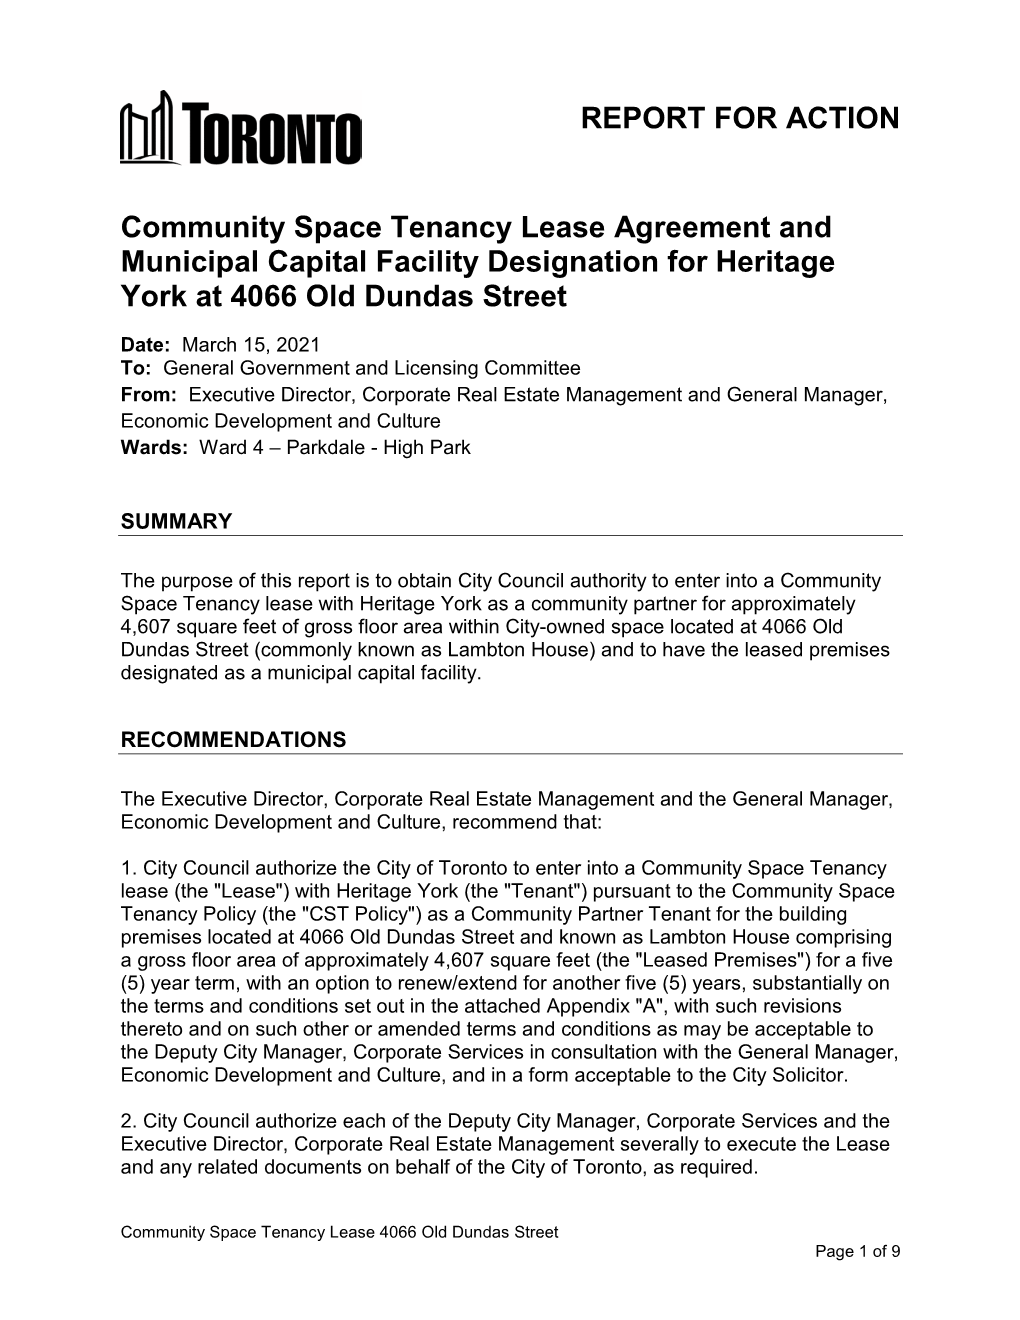 Community Space Tenancy Lease Agreement and Municipal Capital Facility Designation for Heritage York at 4066 Old Dundas Street